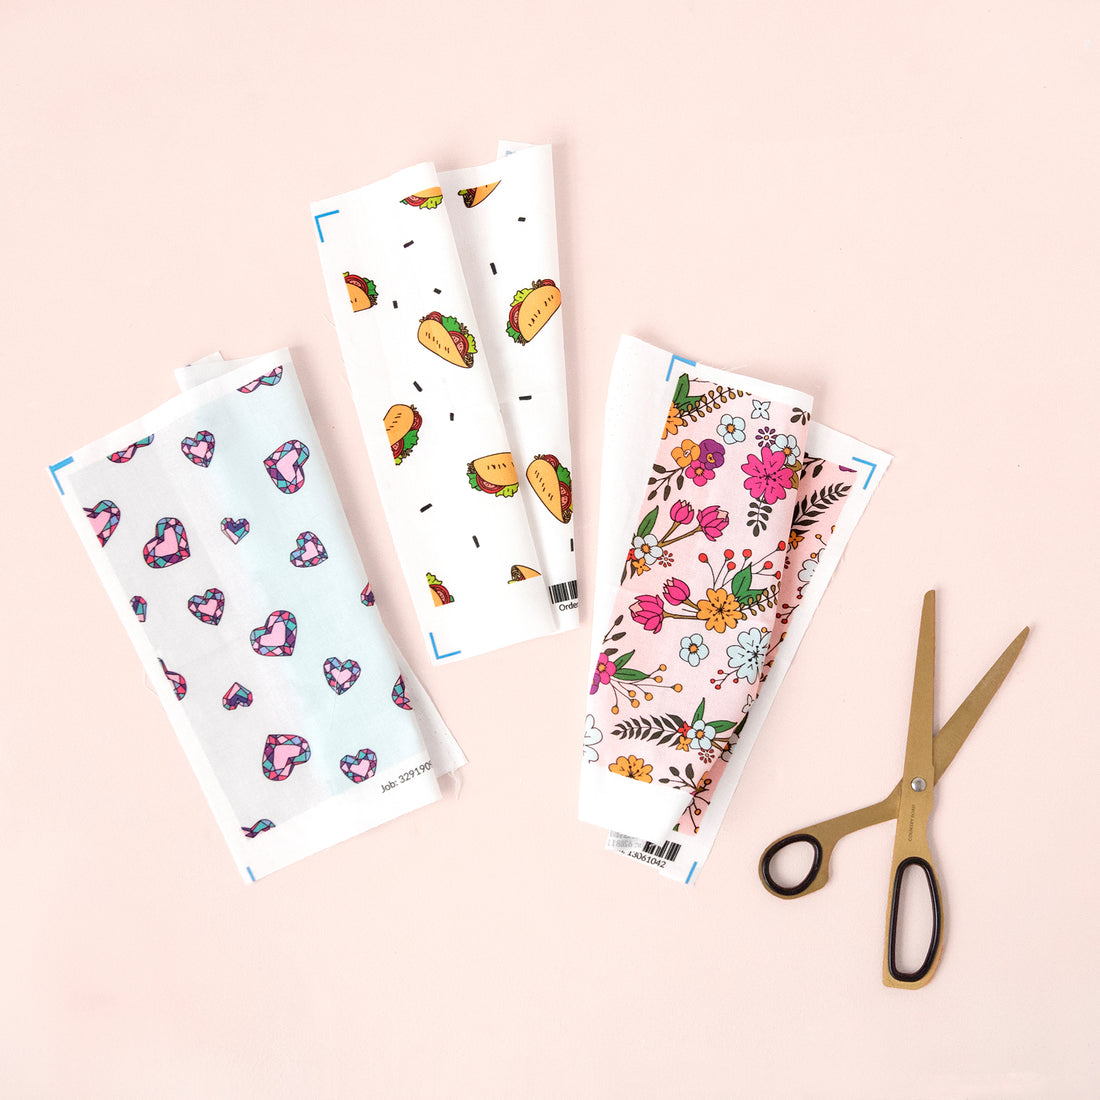 Make and Tell prints now on fabric!